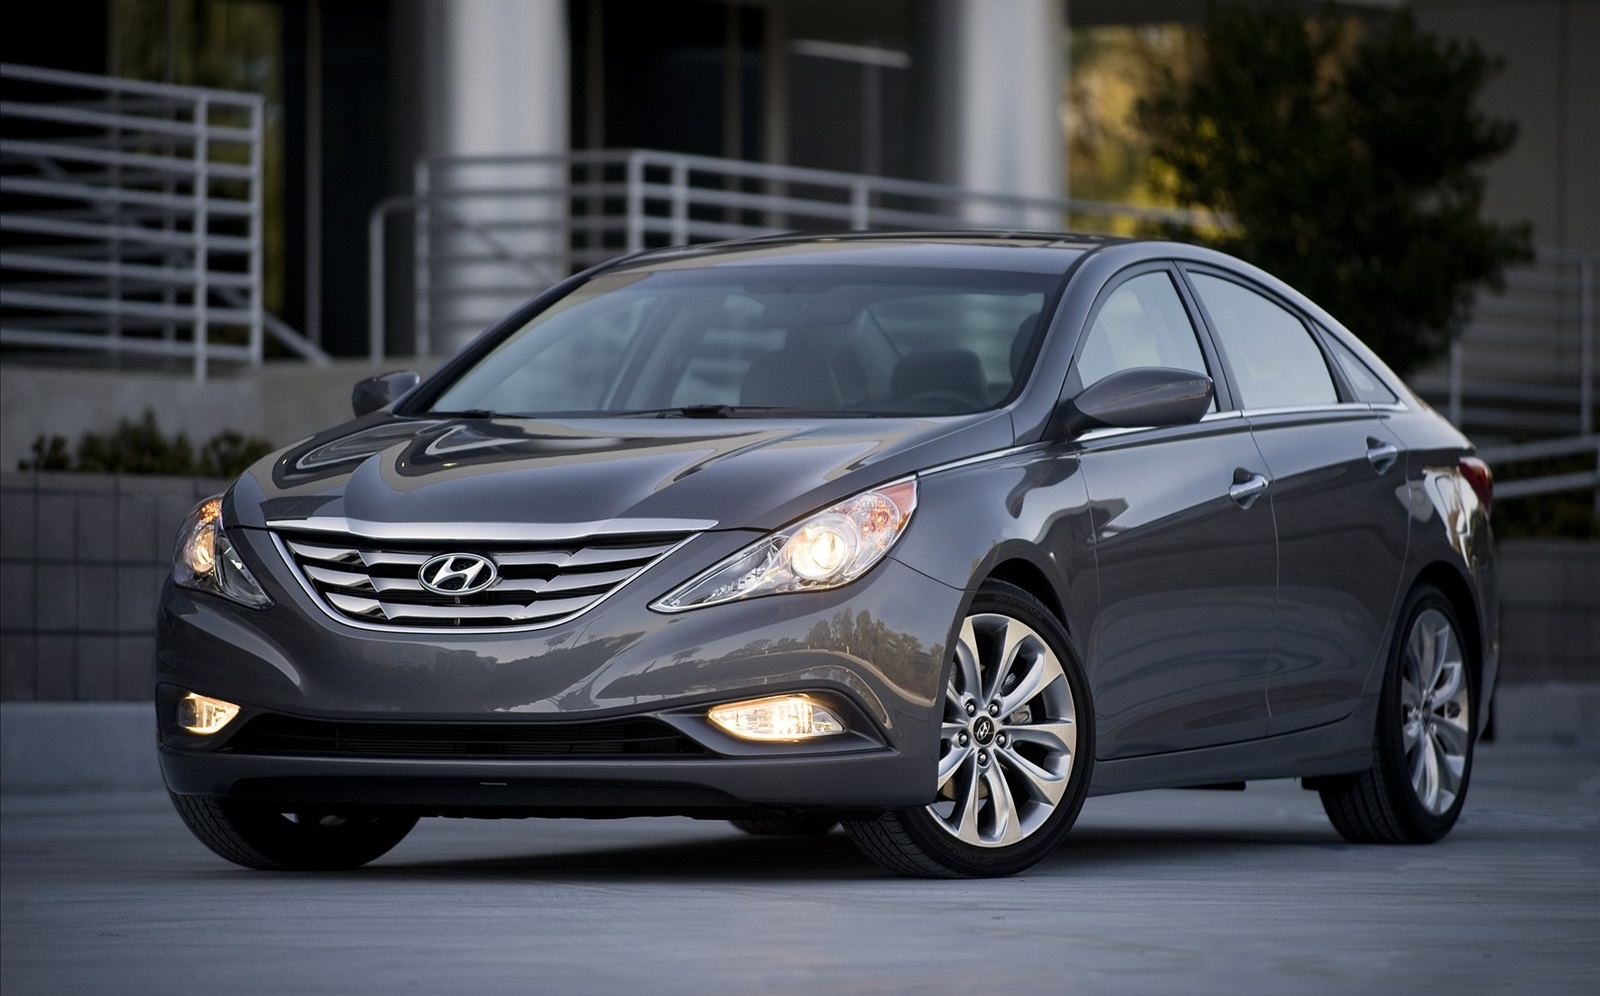 2012 HYUNDAI SONATA - About the Model and VIN Numbers